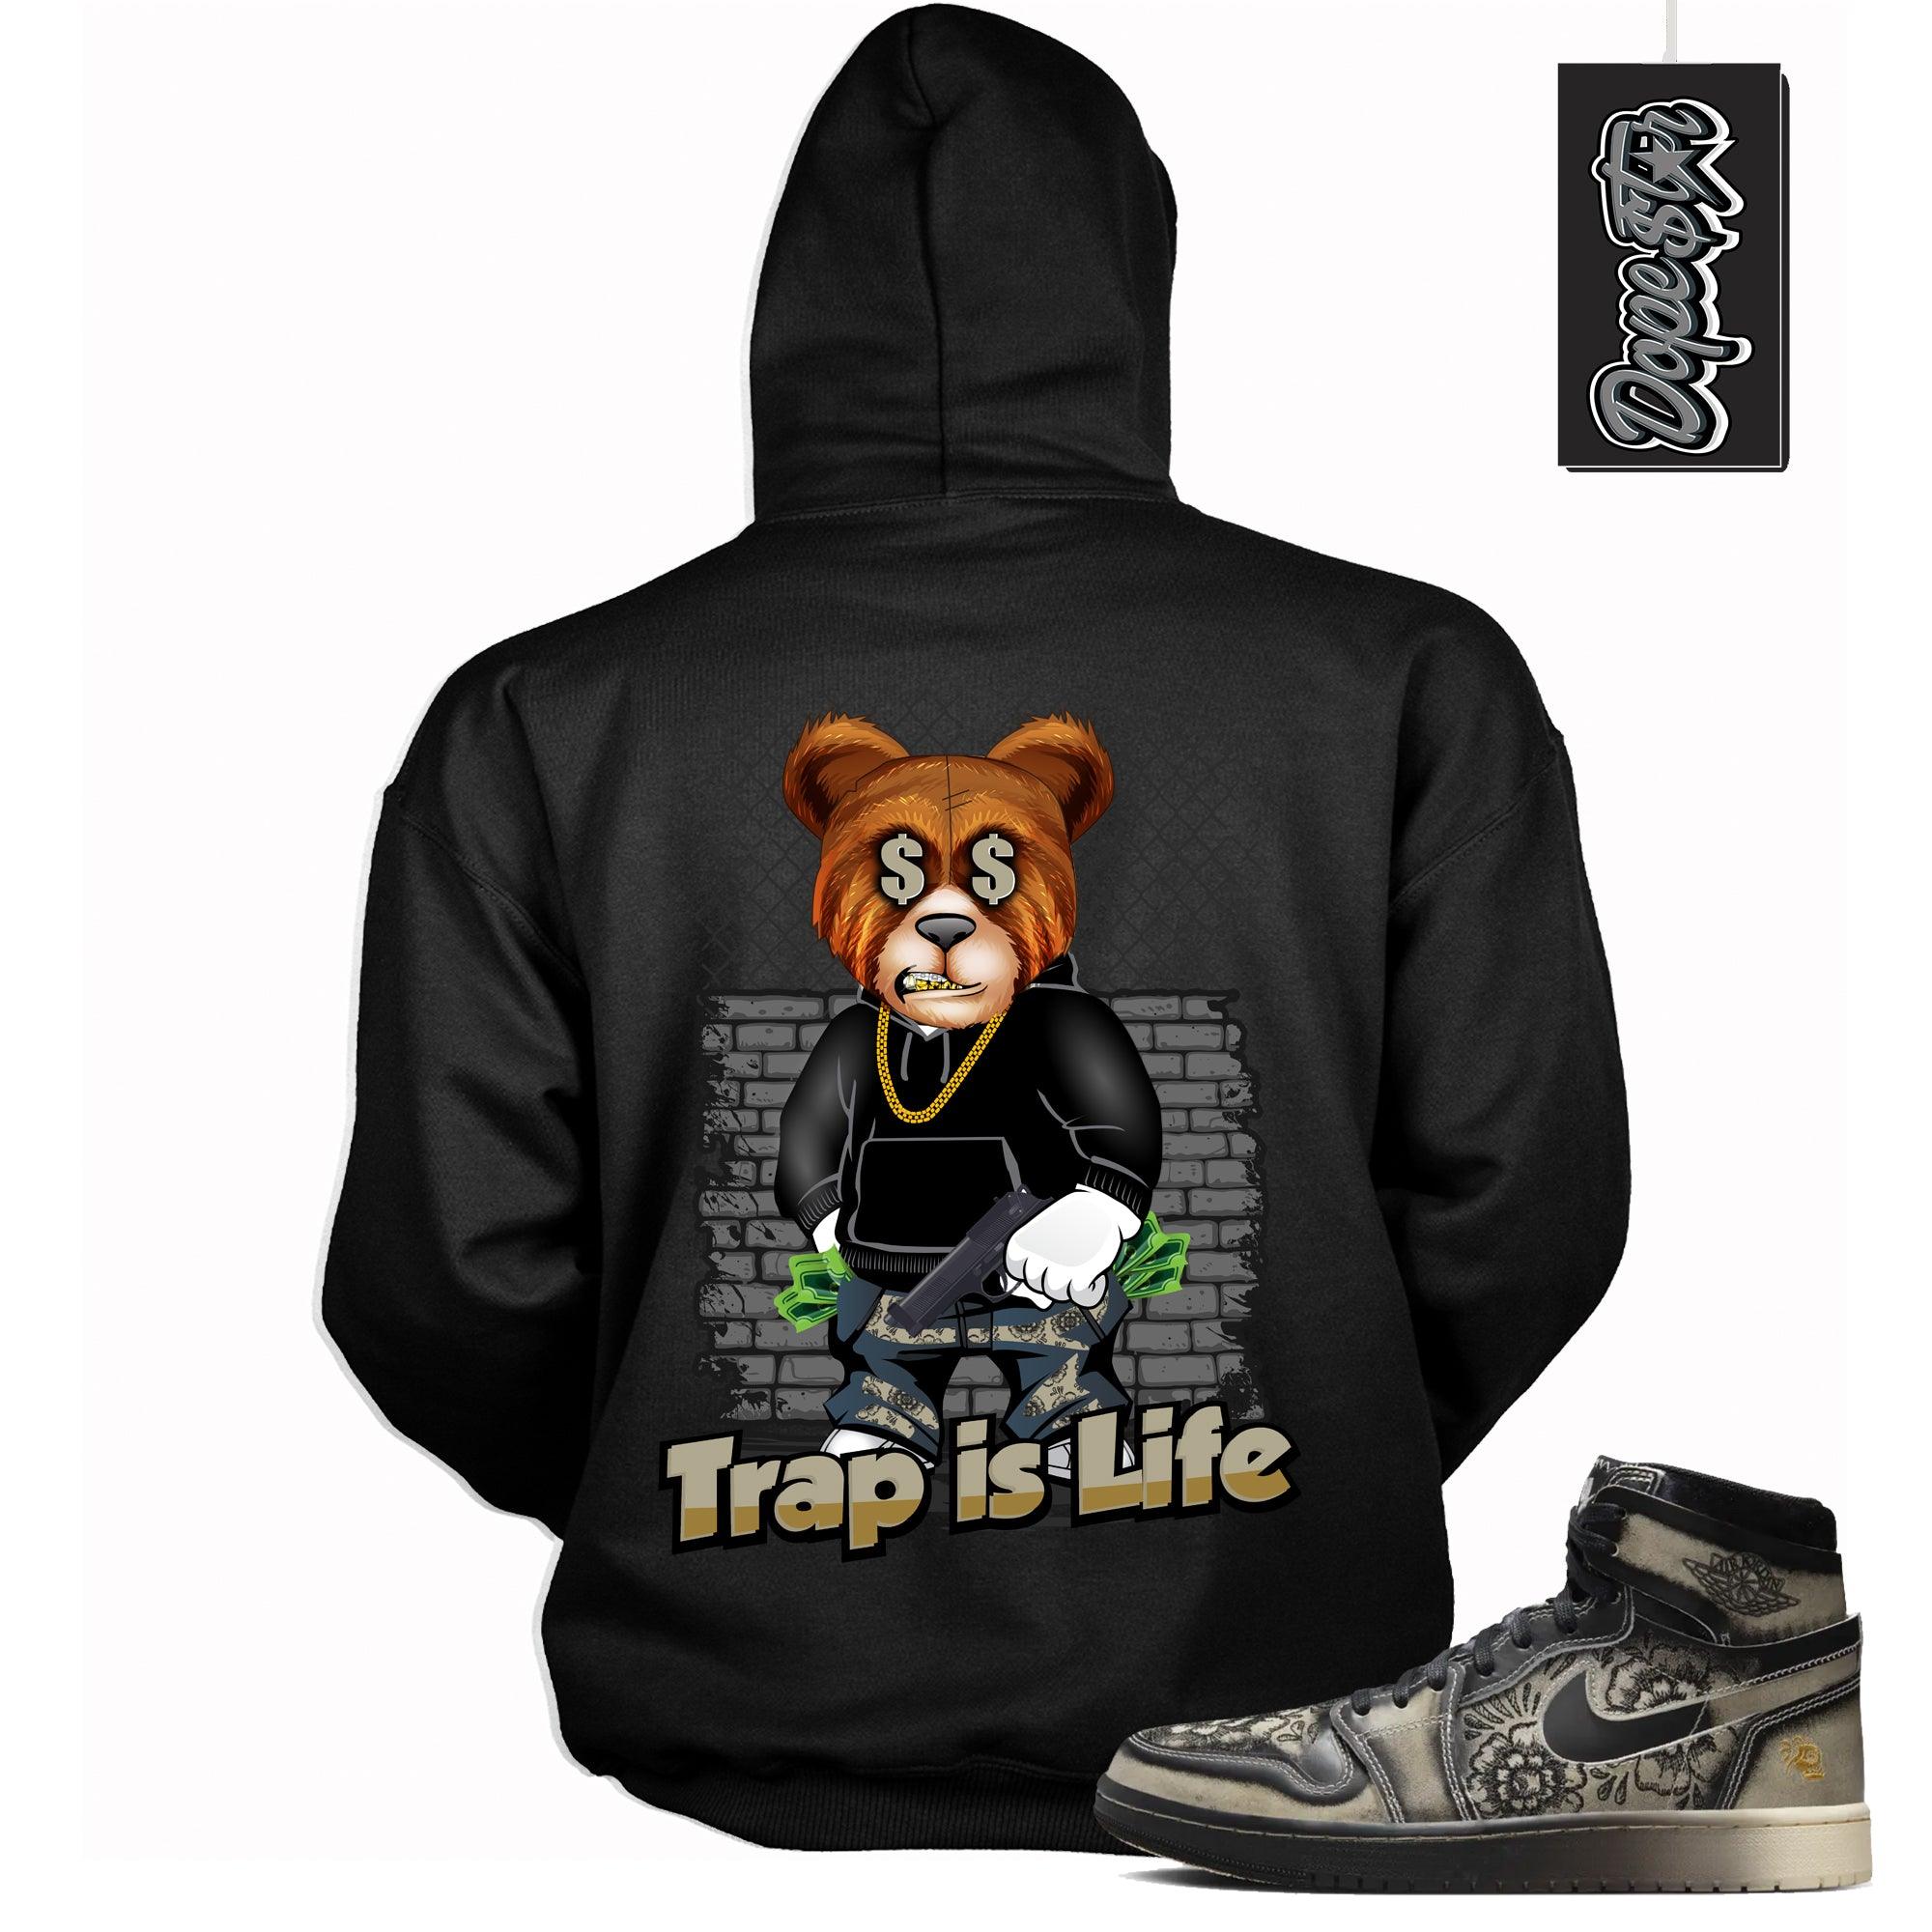 Cool Black Graphic Hoodie with “ TRAP IS LIFE “ print, that perfectly matches Air Jordan 1 High Zoom Comfort 2 Dia de Muertos Black and Pale Ivory sneakers